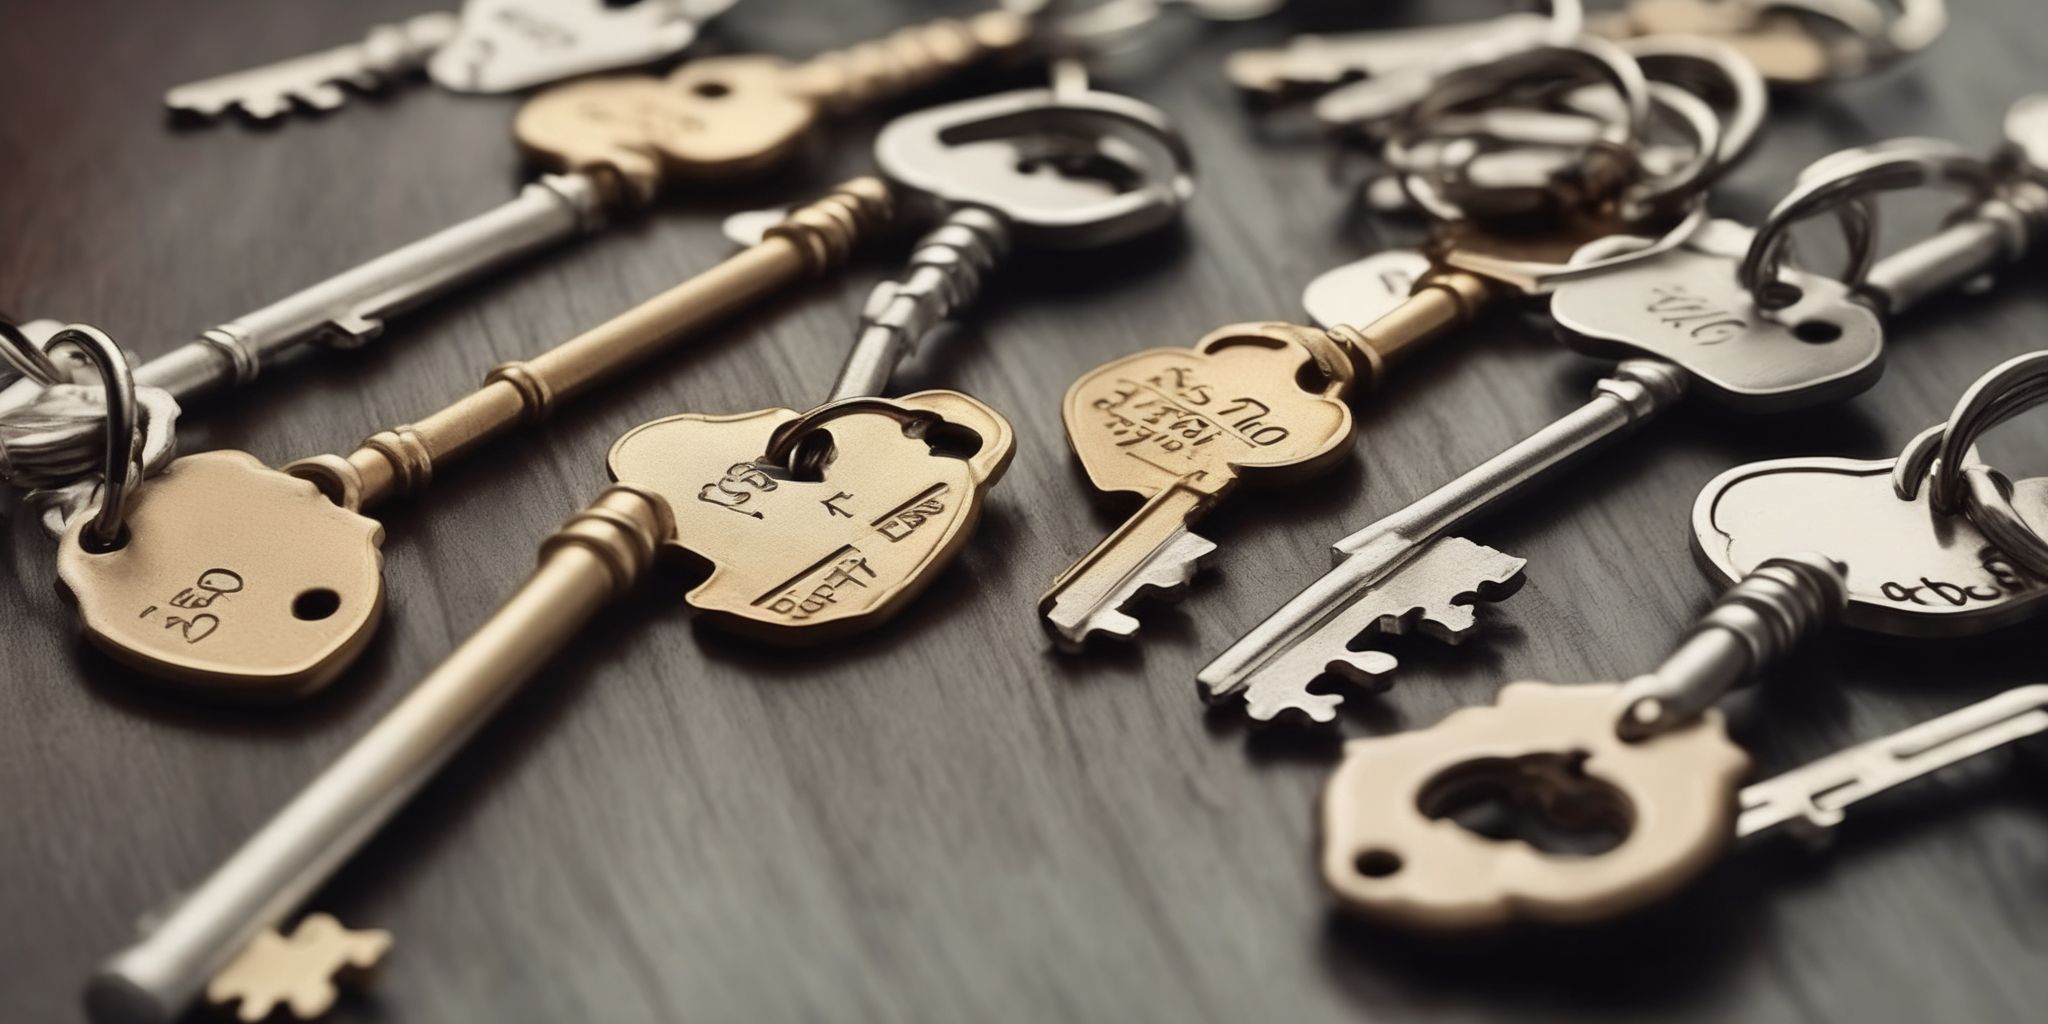 Keys  in realistic, photographic style